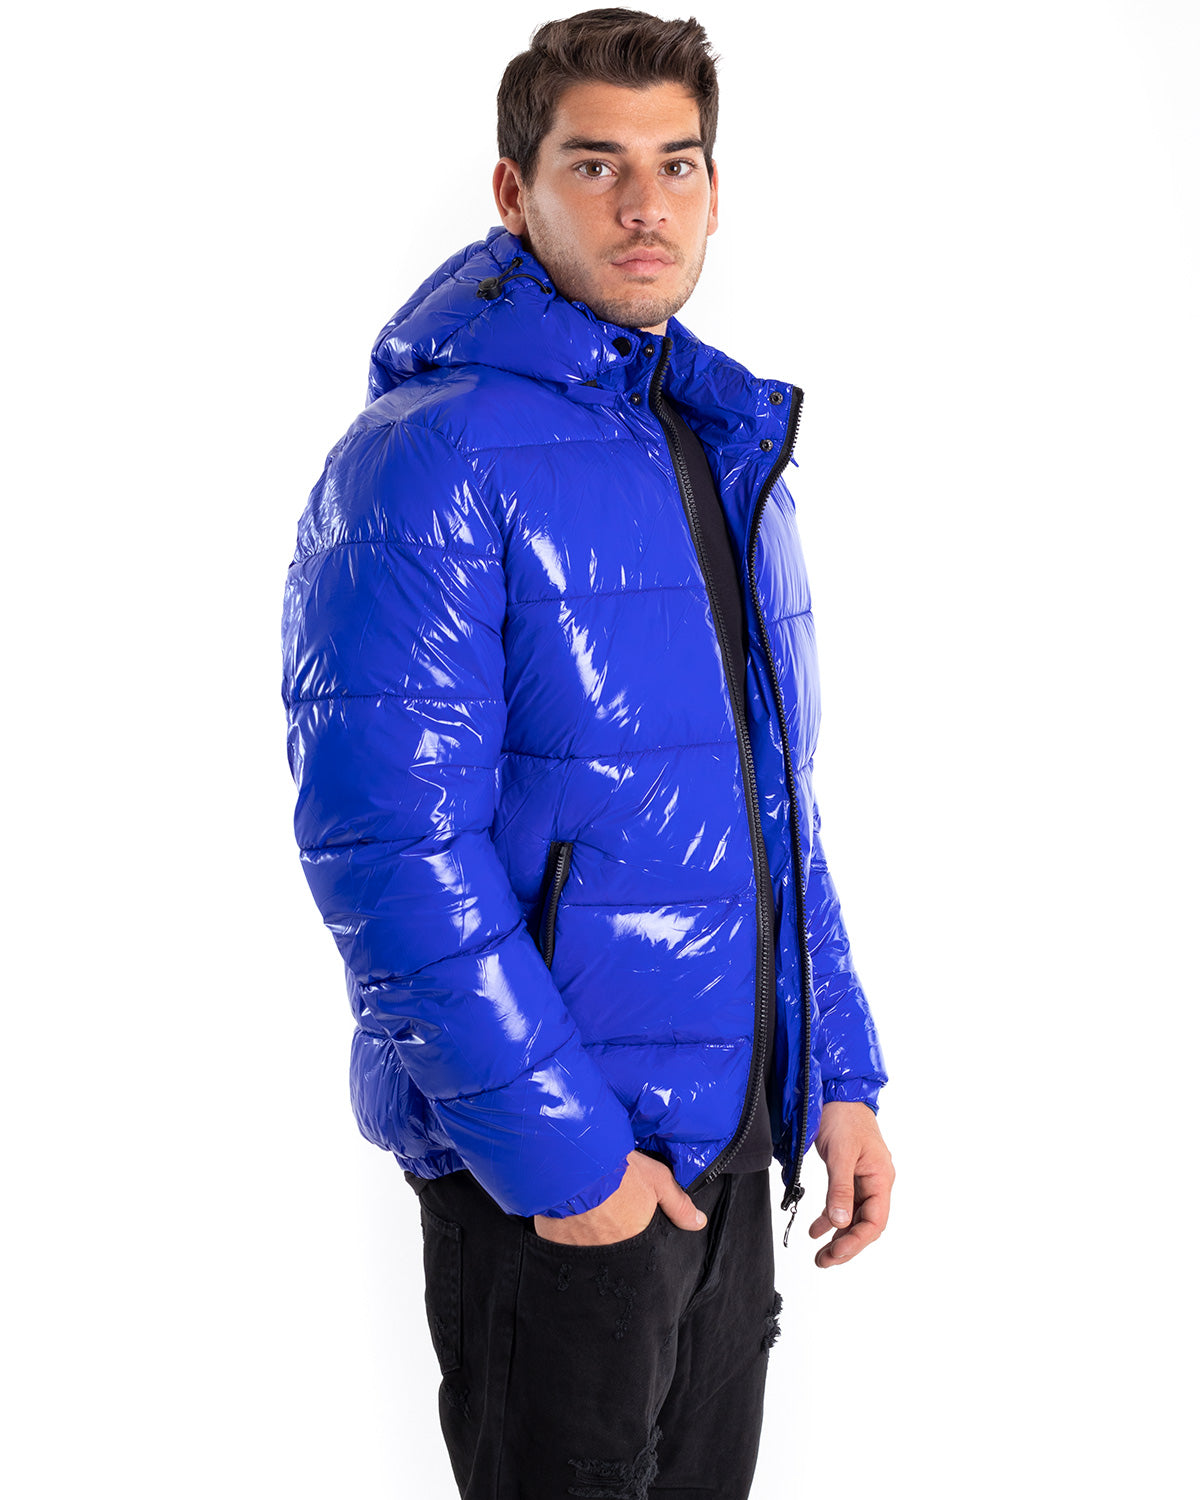 Men's Oversized Patent Leather Jacket Solid Color Royal Shiny Casual GIOSAL-G2896A